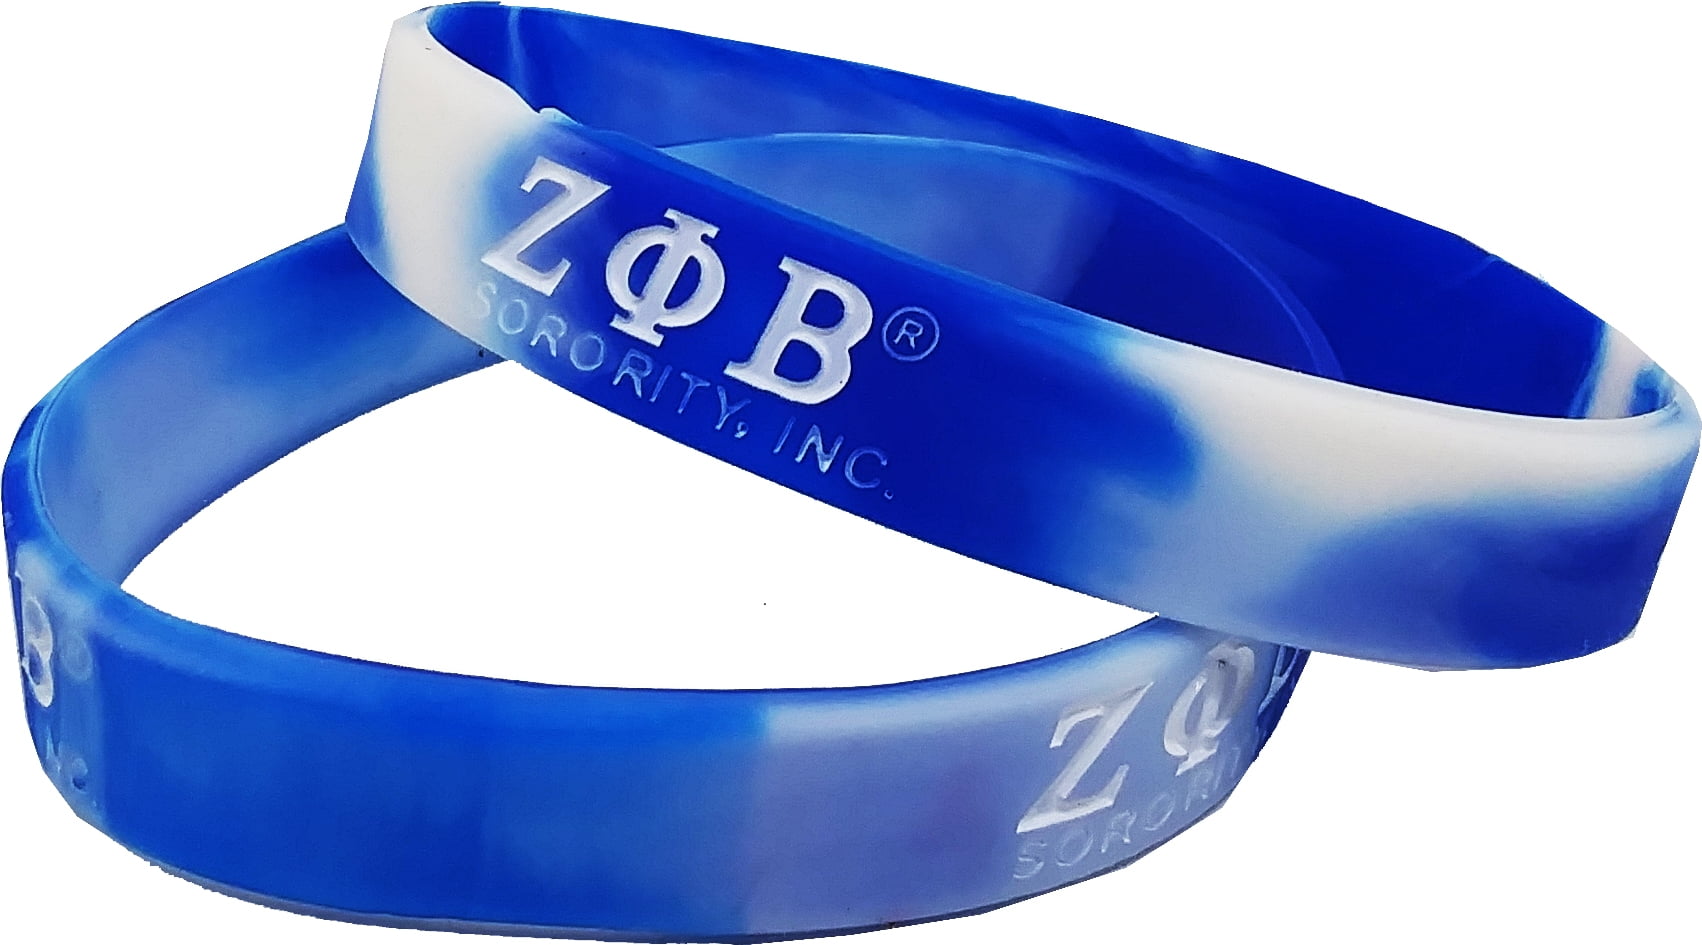 Cultural Exchange Sigma Gamma Rho Tie-Dye Silicone Wristband Pack of 2 - Blue/Gold - 8 